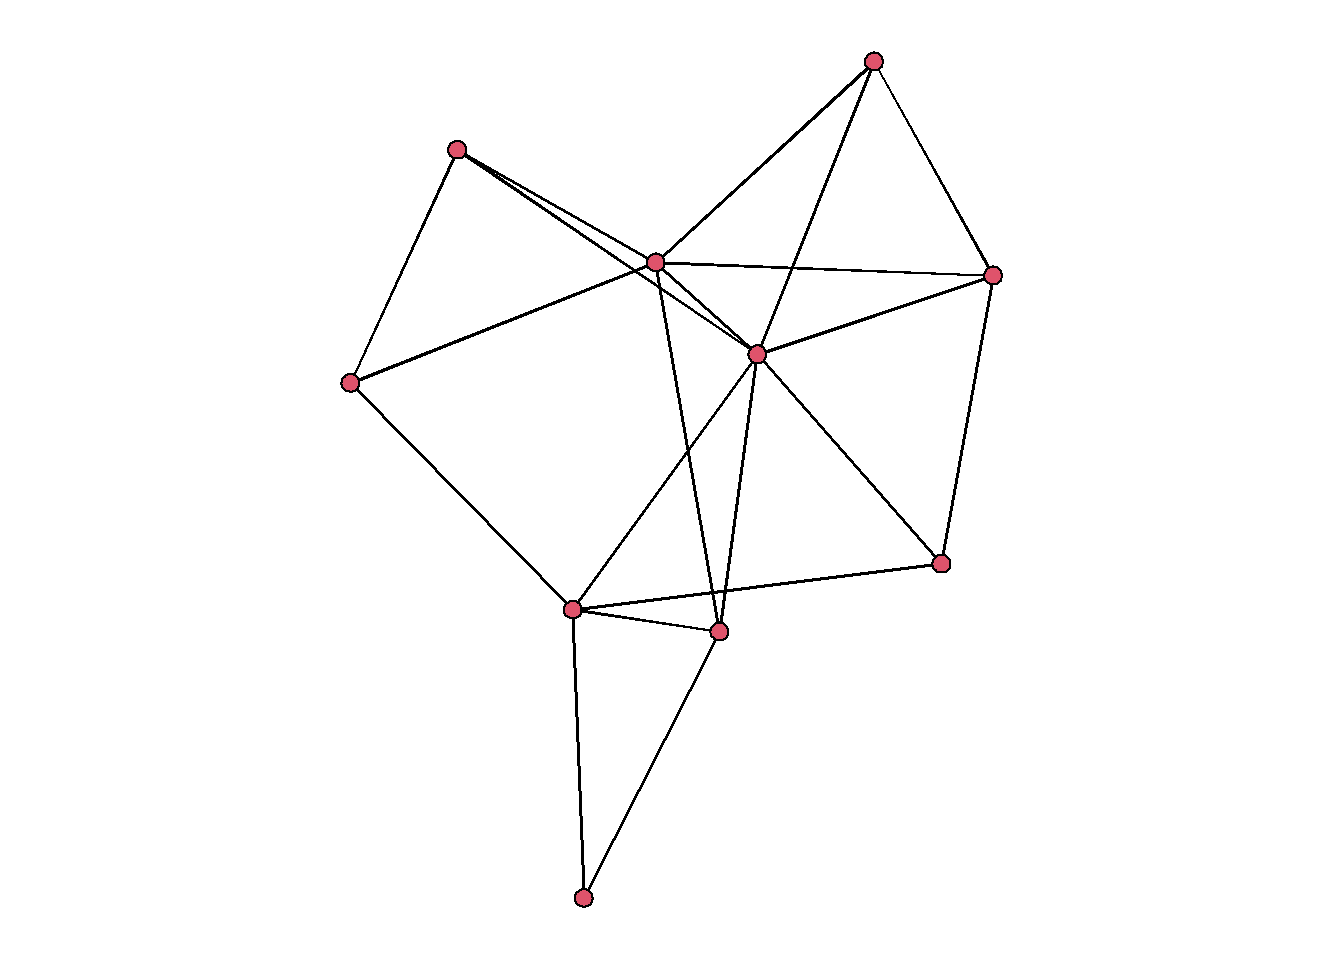 A single layer (one-mode) network with 10 nodes.